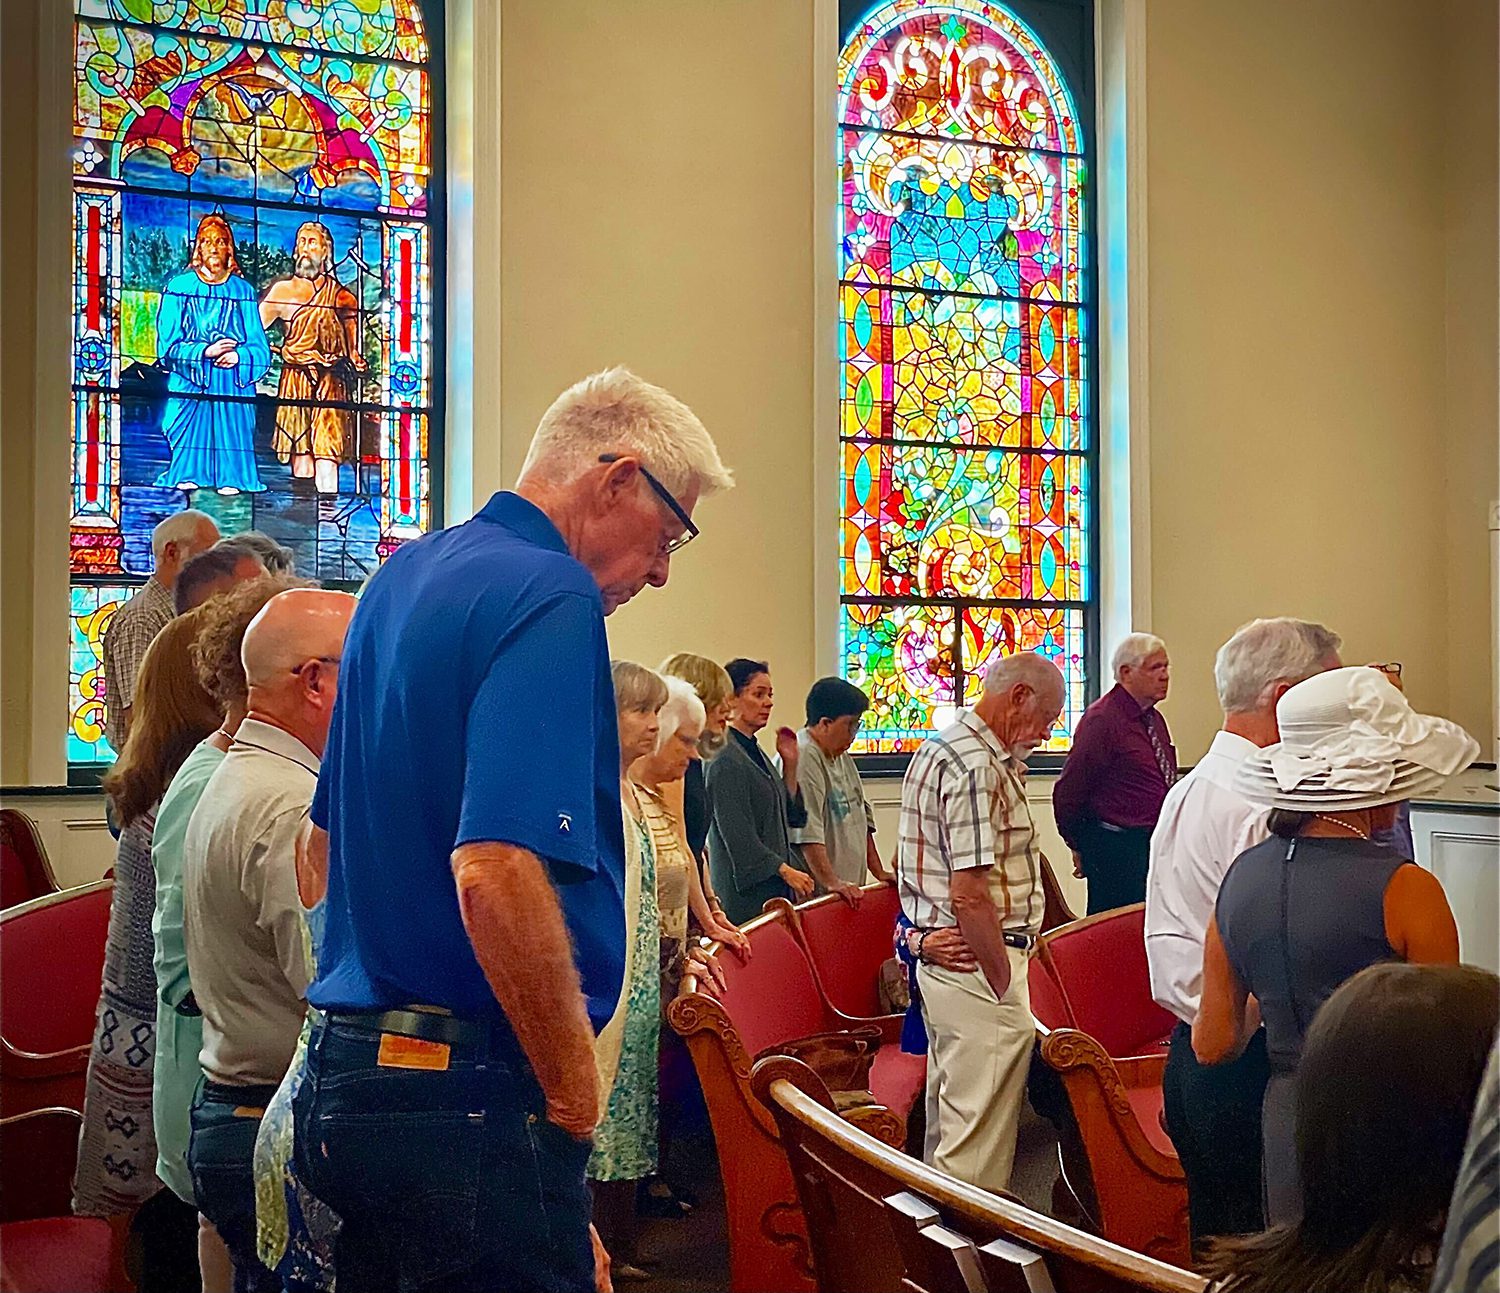 Members bow their heads in prayer during a service at First Baptist Church in Farmsville, Texas. RNS photo by Riley Farrell